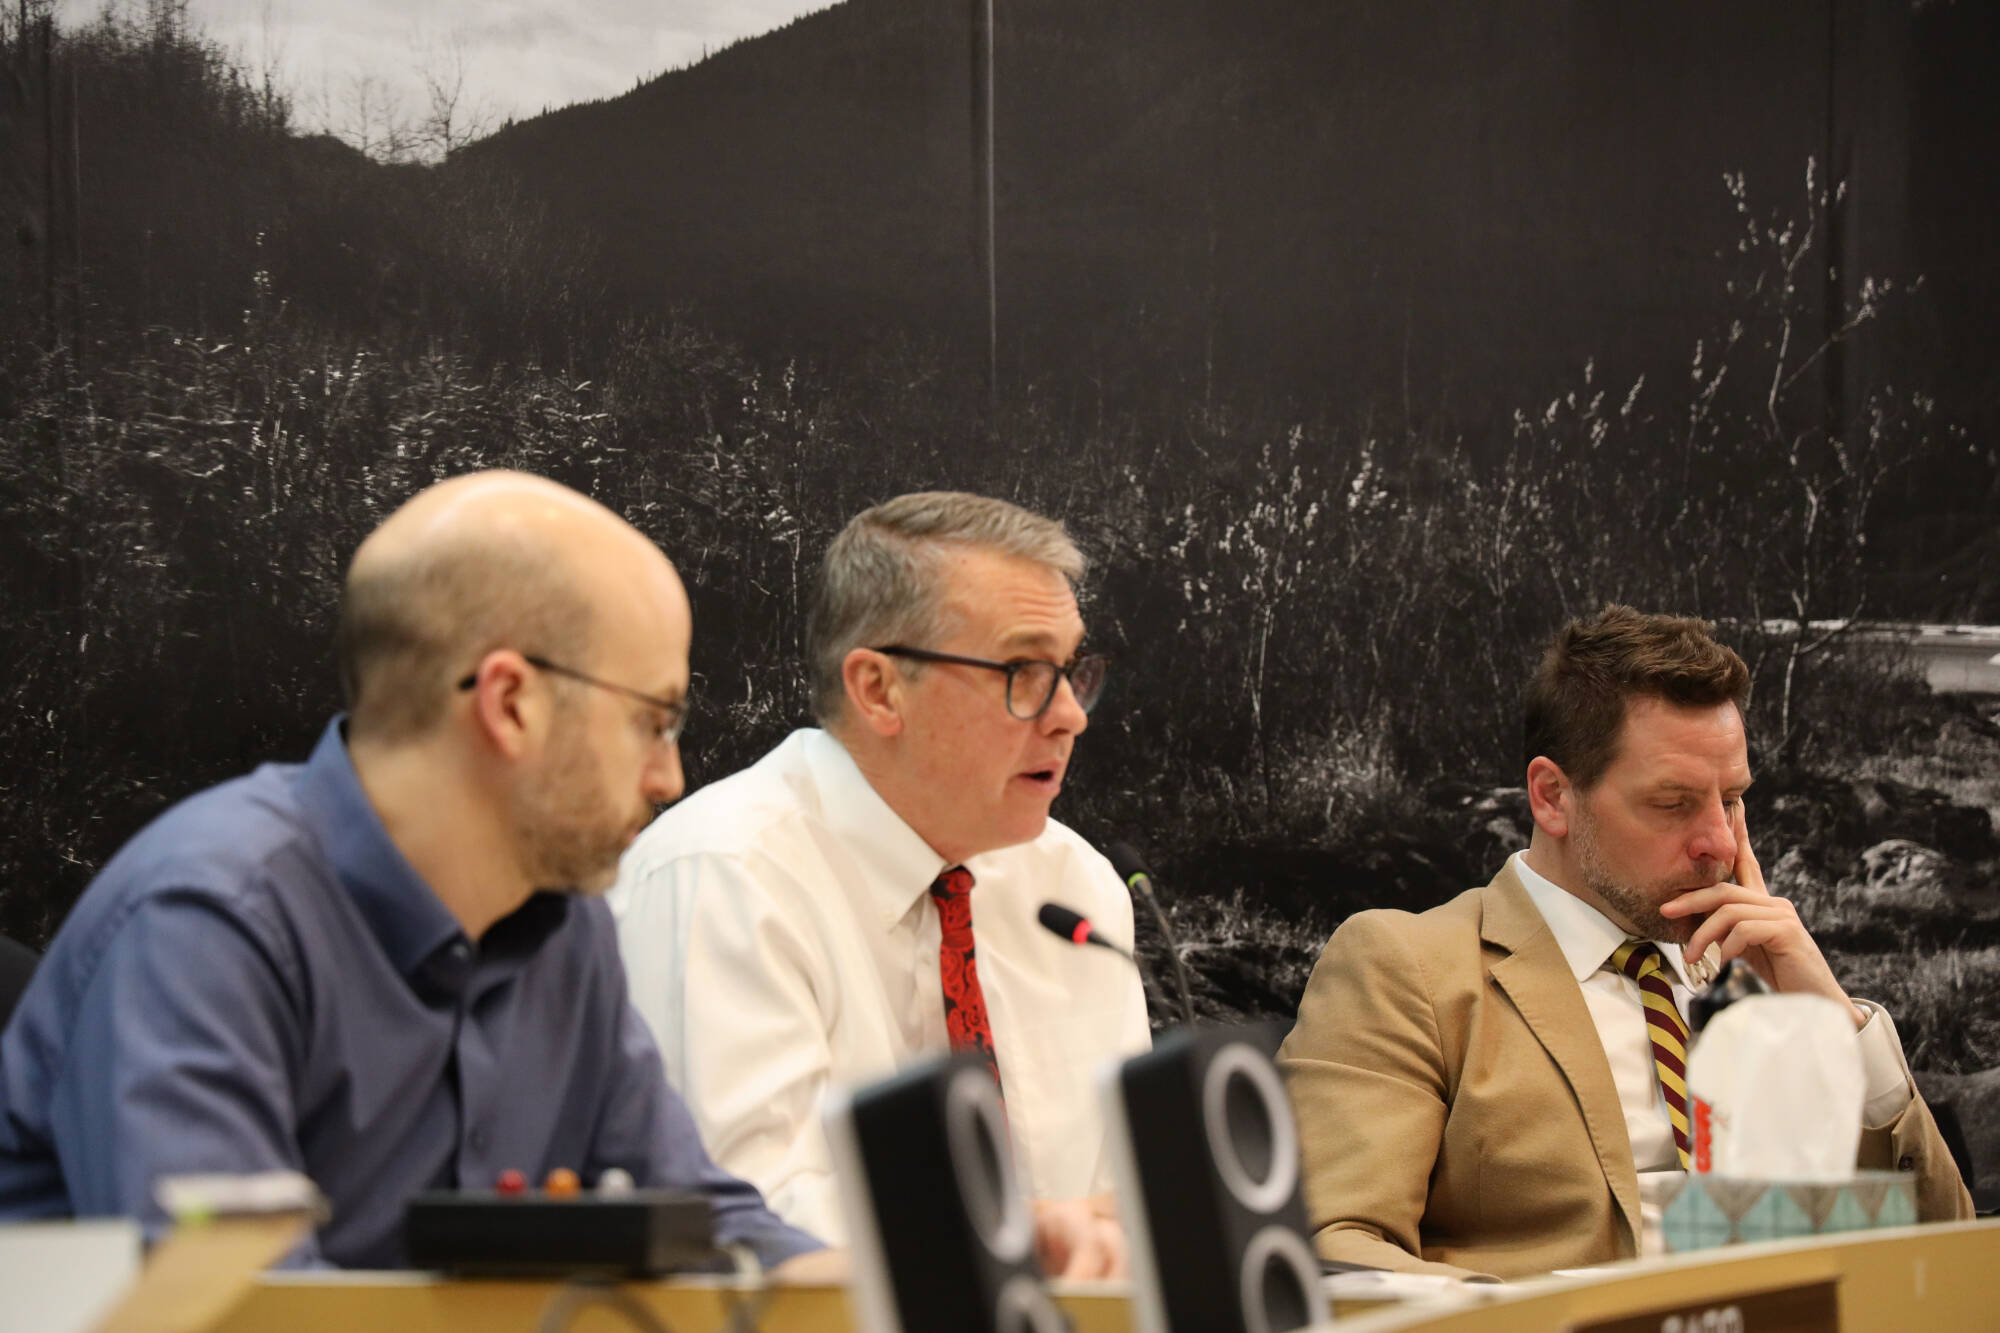 From left to right, City and Borough of Juneau Deputy City Manager Robert Barr, City Manager Rorie Watt and Finance Director Jeff Rogers discuss a package of proposals addressing recruiting and retaining city employees during the Wednesday evening Assembly Finance Committee meeting. (Clarise Larson / Juneau Empire)